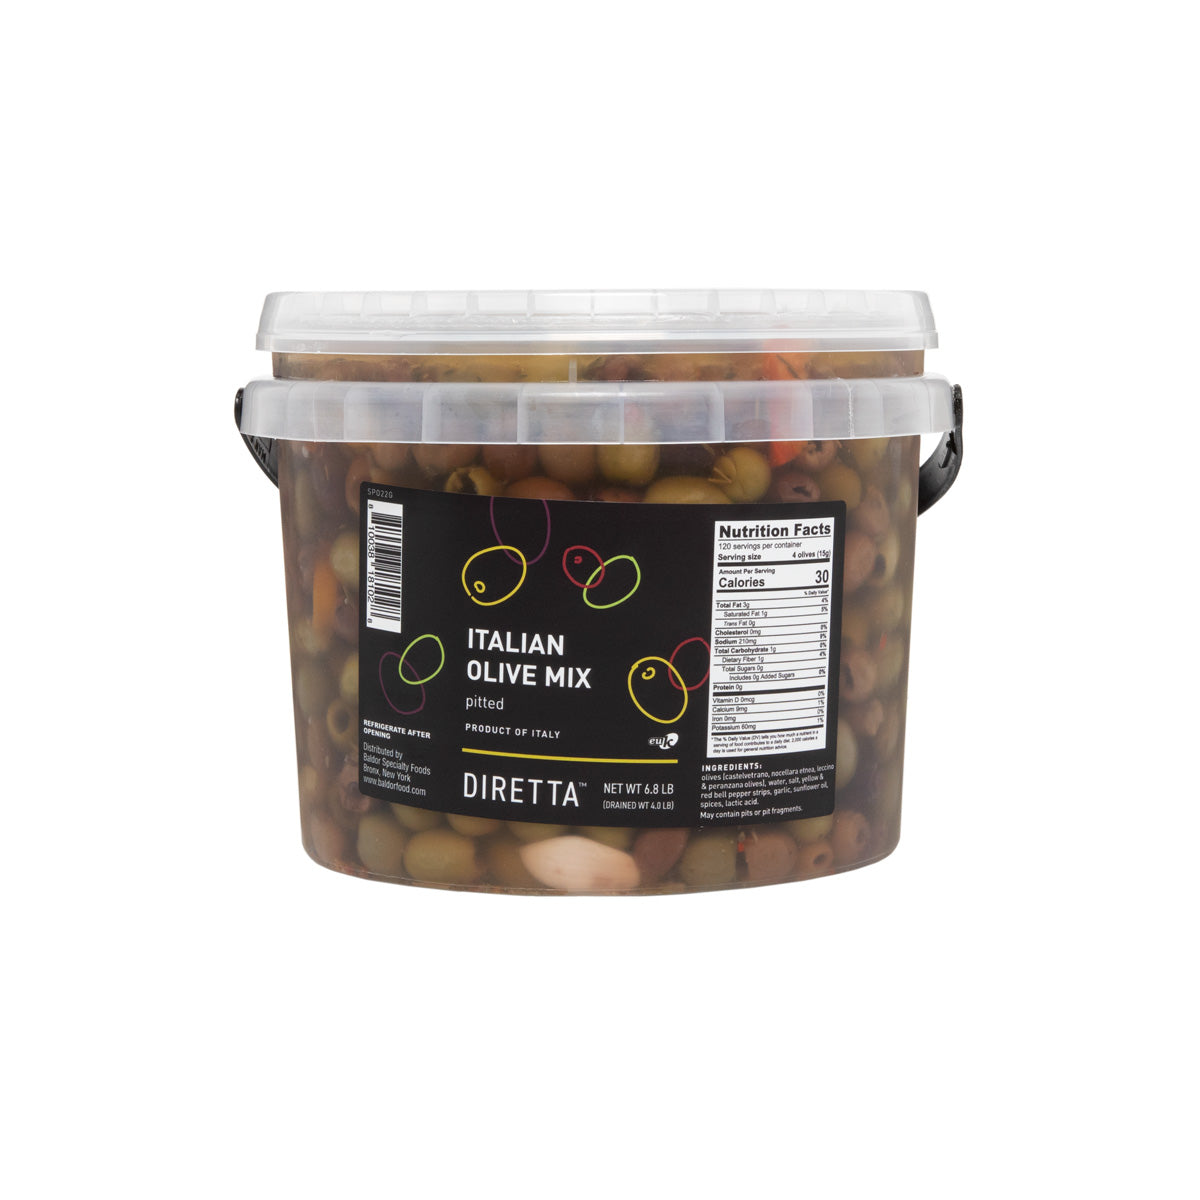 Diretta Pitted Black and Green Italian Mixed Olives